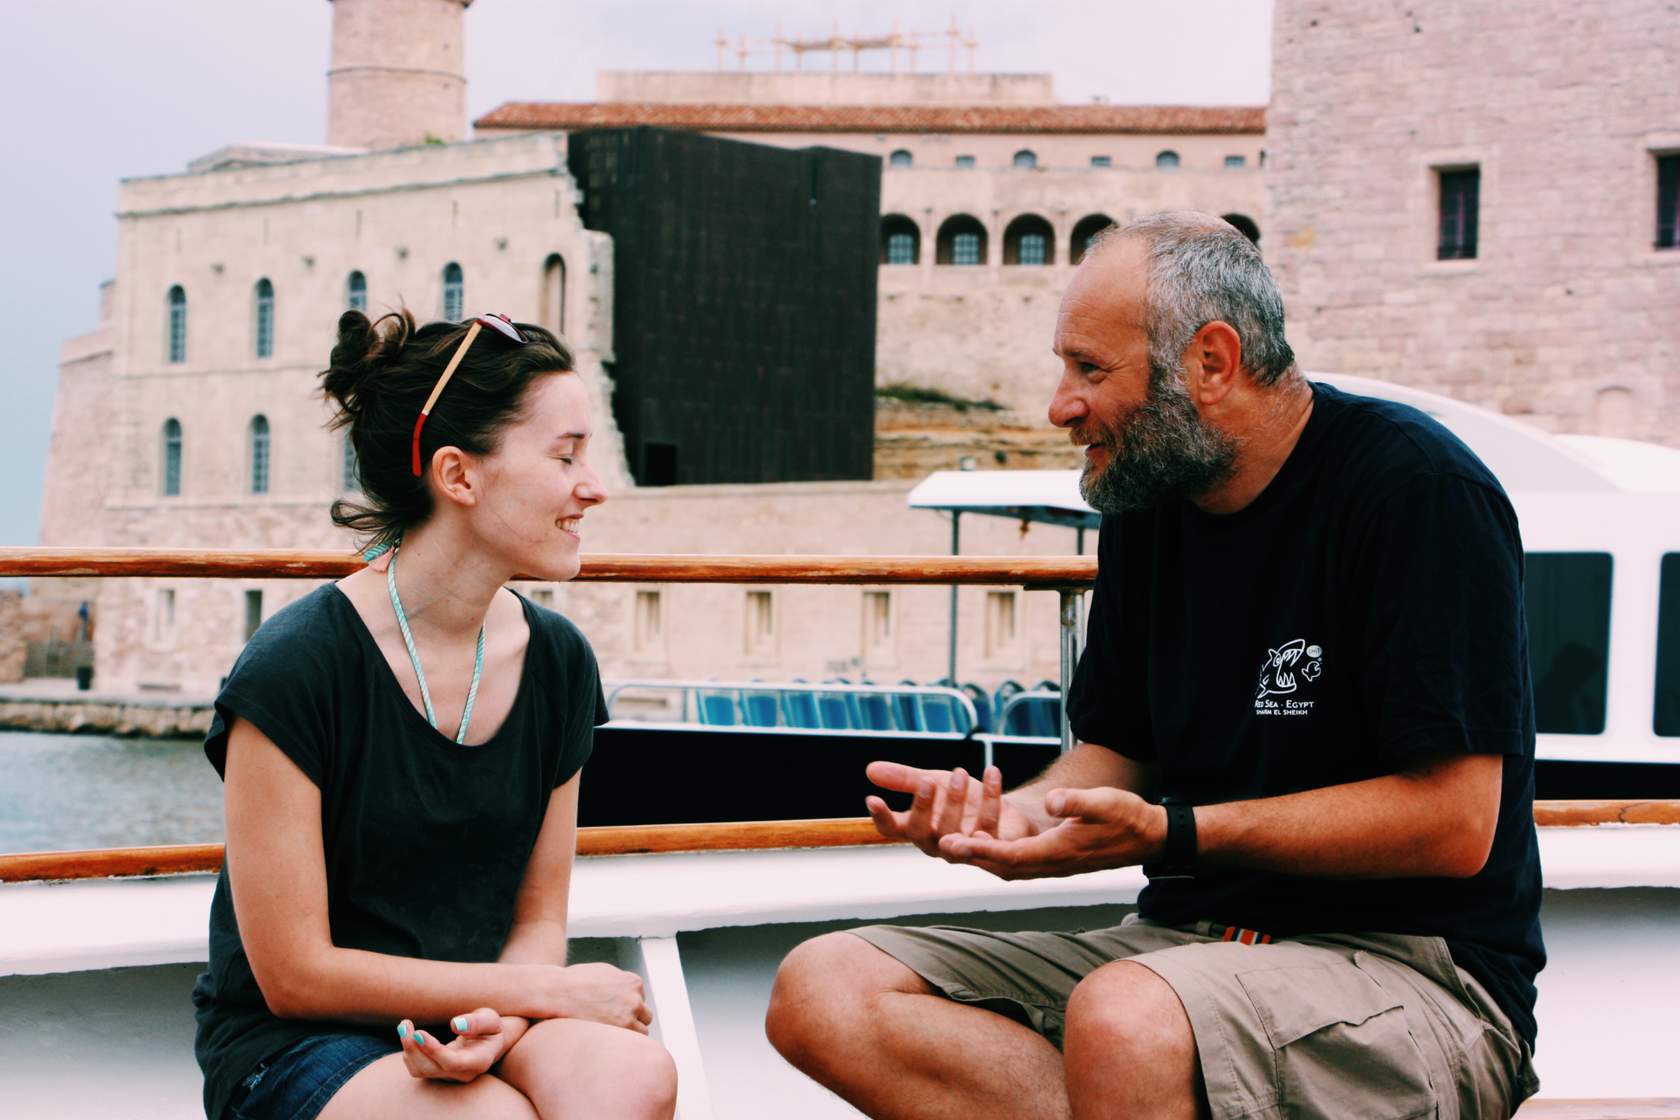 A man and woman engaged in conversation on a boat, with a castle in the background.